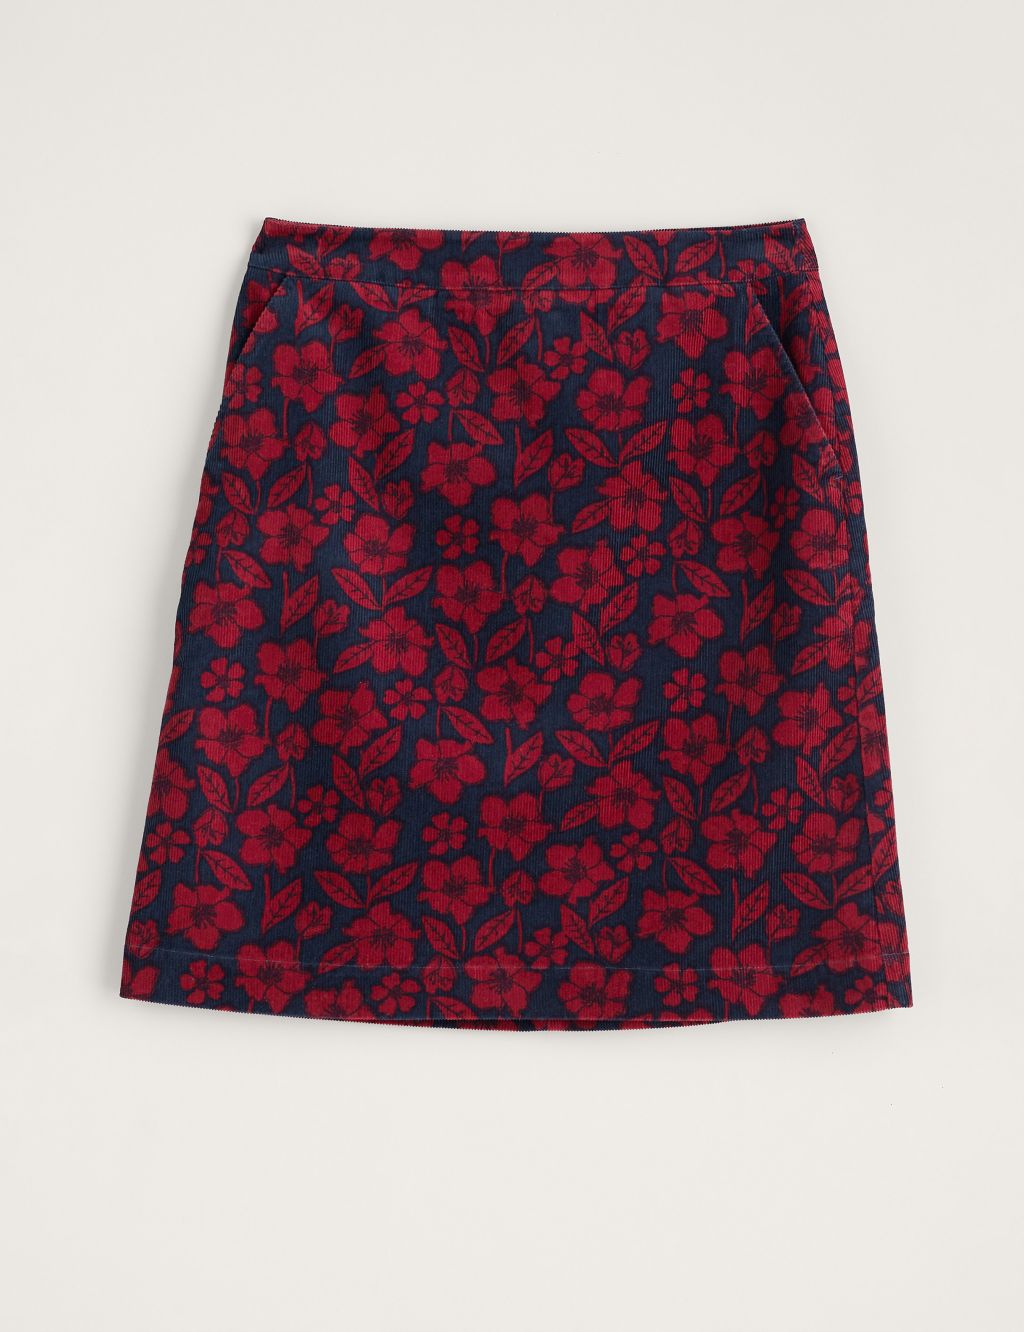 Cord Floral Knee Length A-Line Skirt image 2